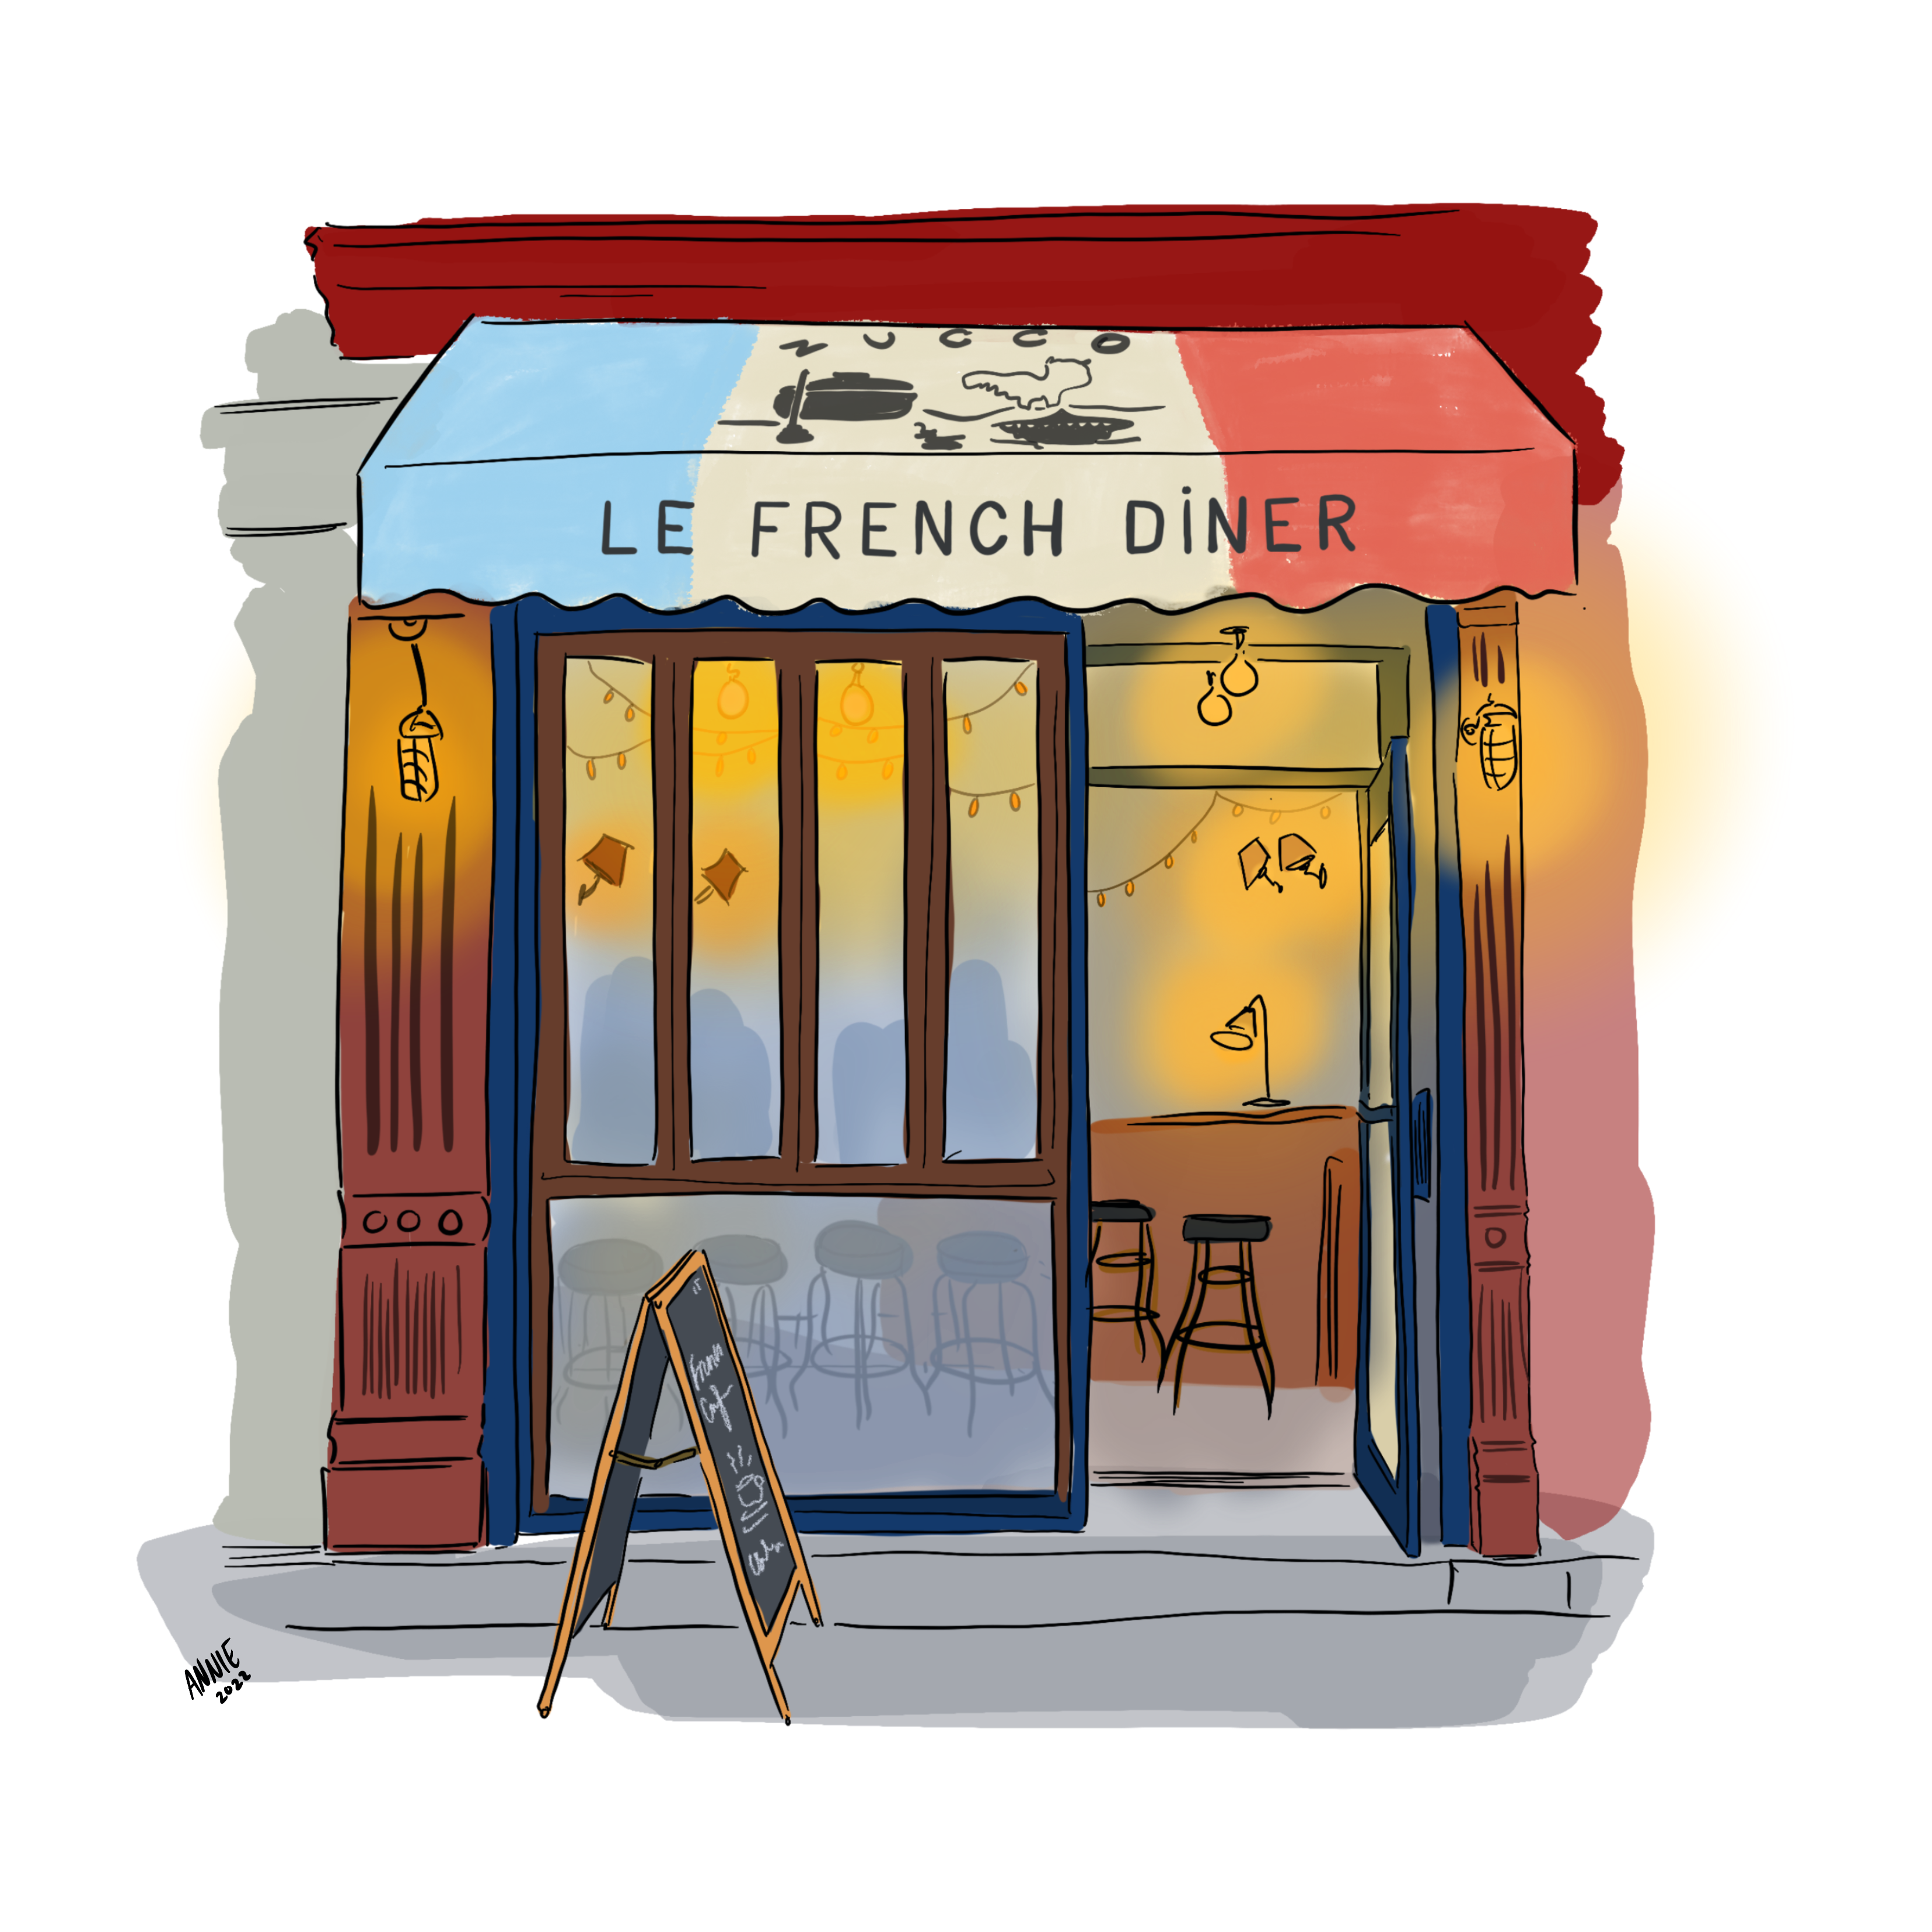 Le French Diner